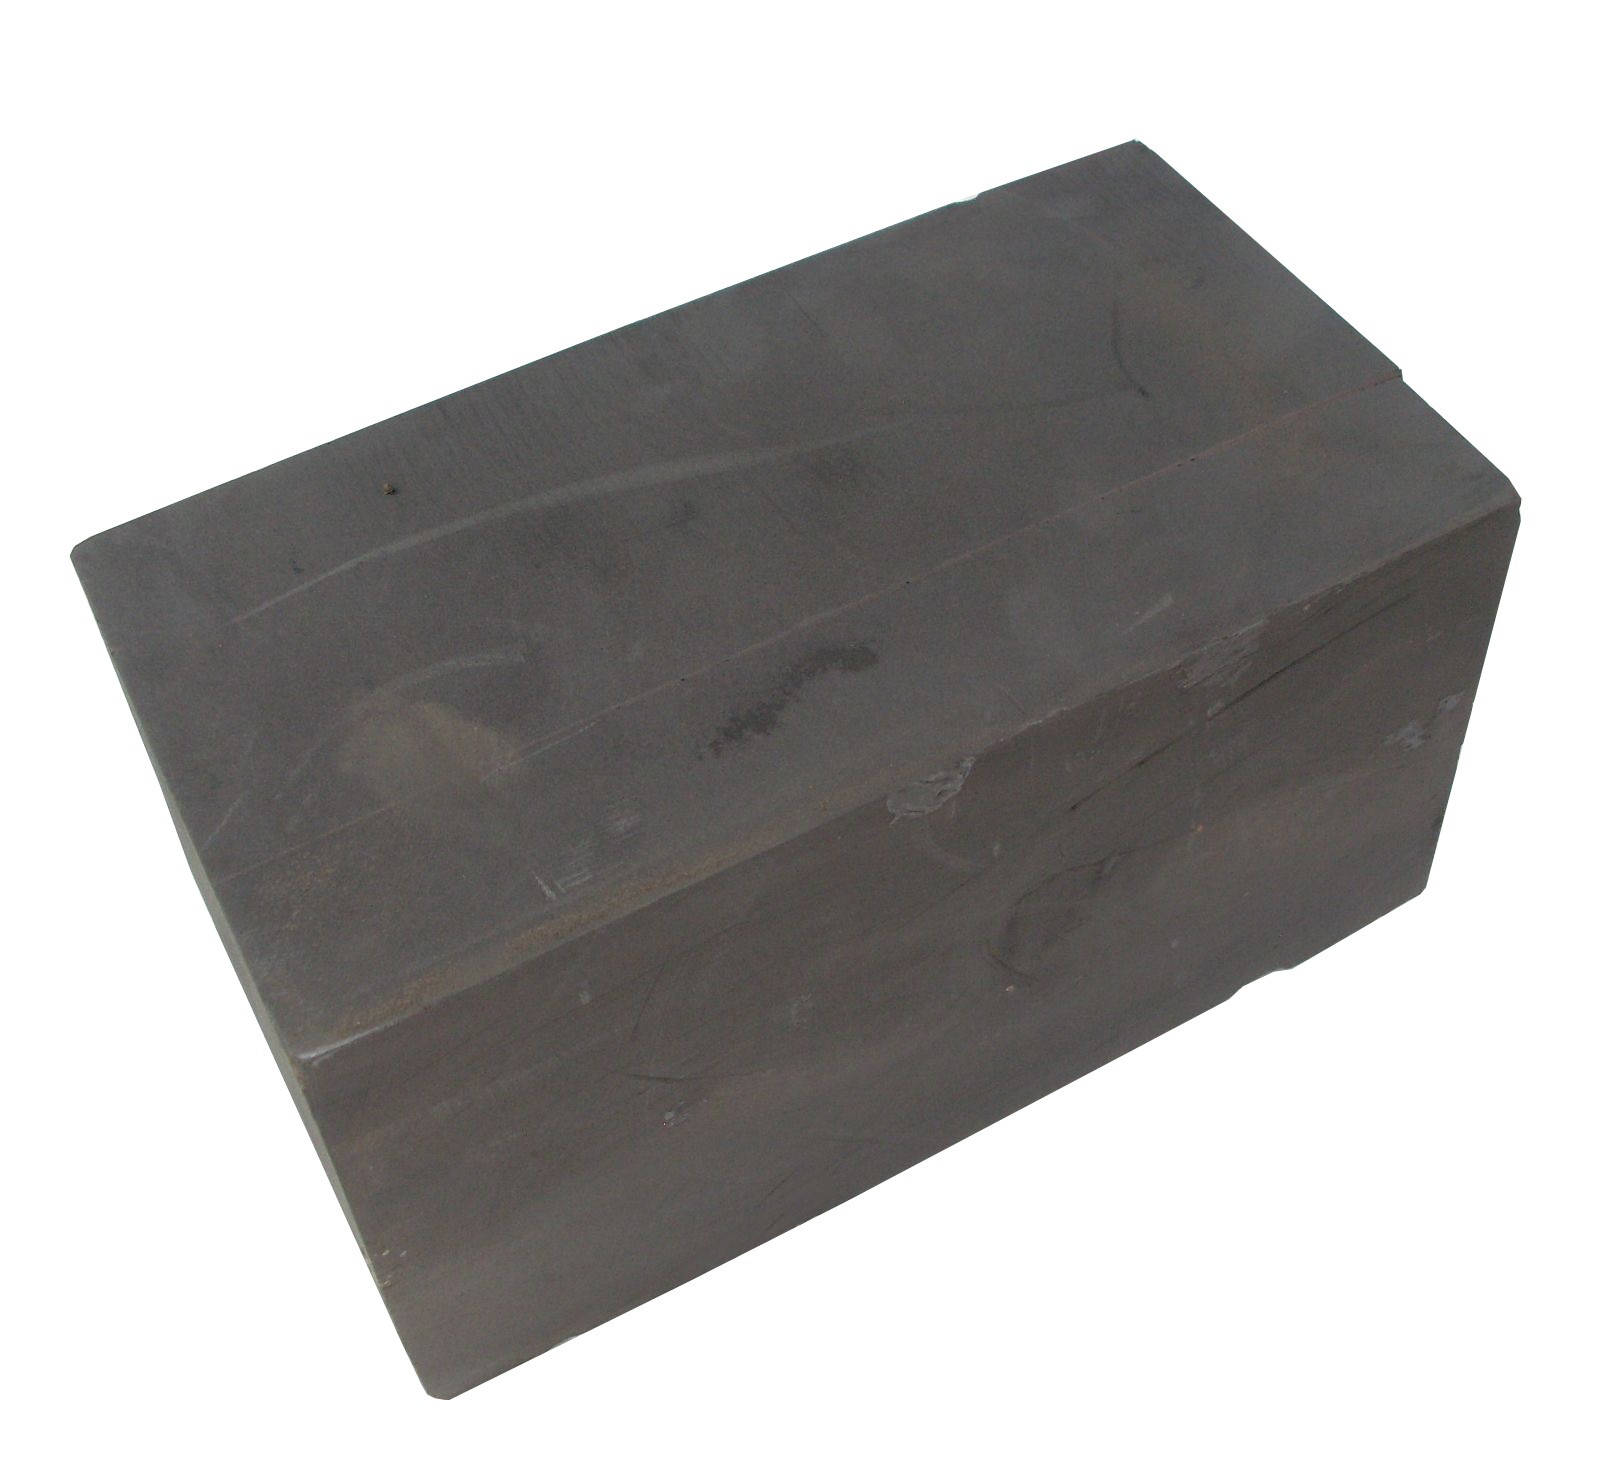 Fine Grain Size 7 um Roughing and Finishing Graphite Electrode Block EDM